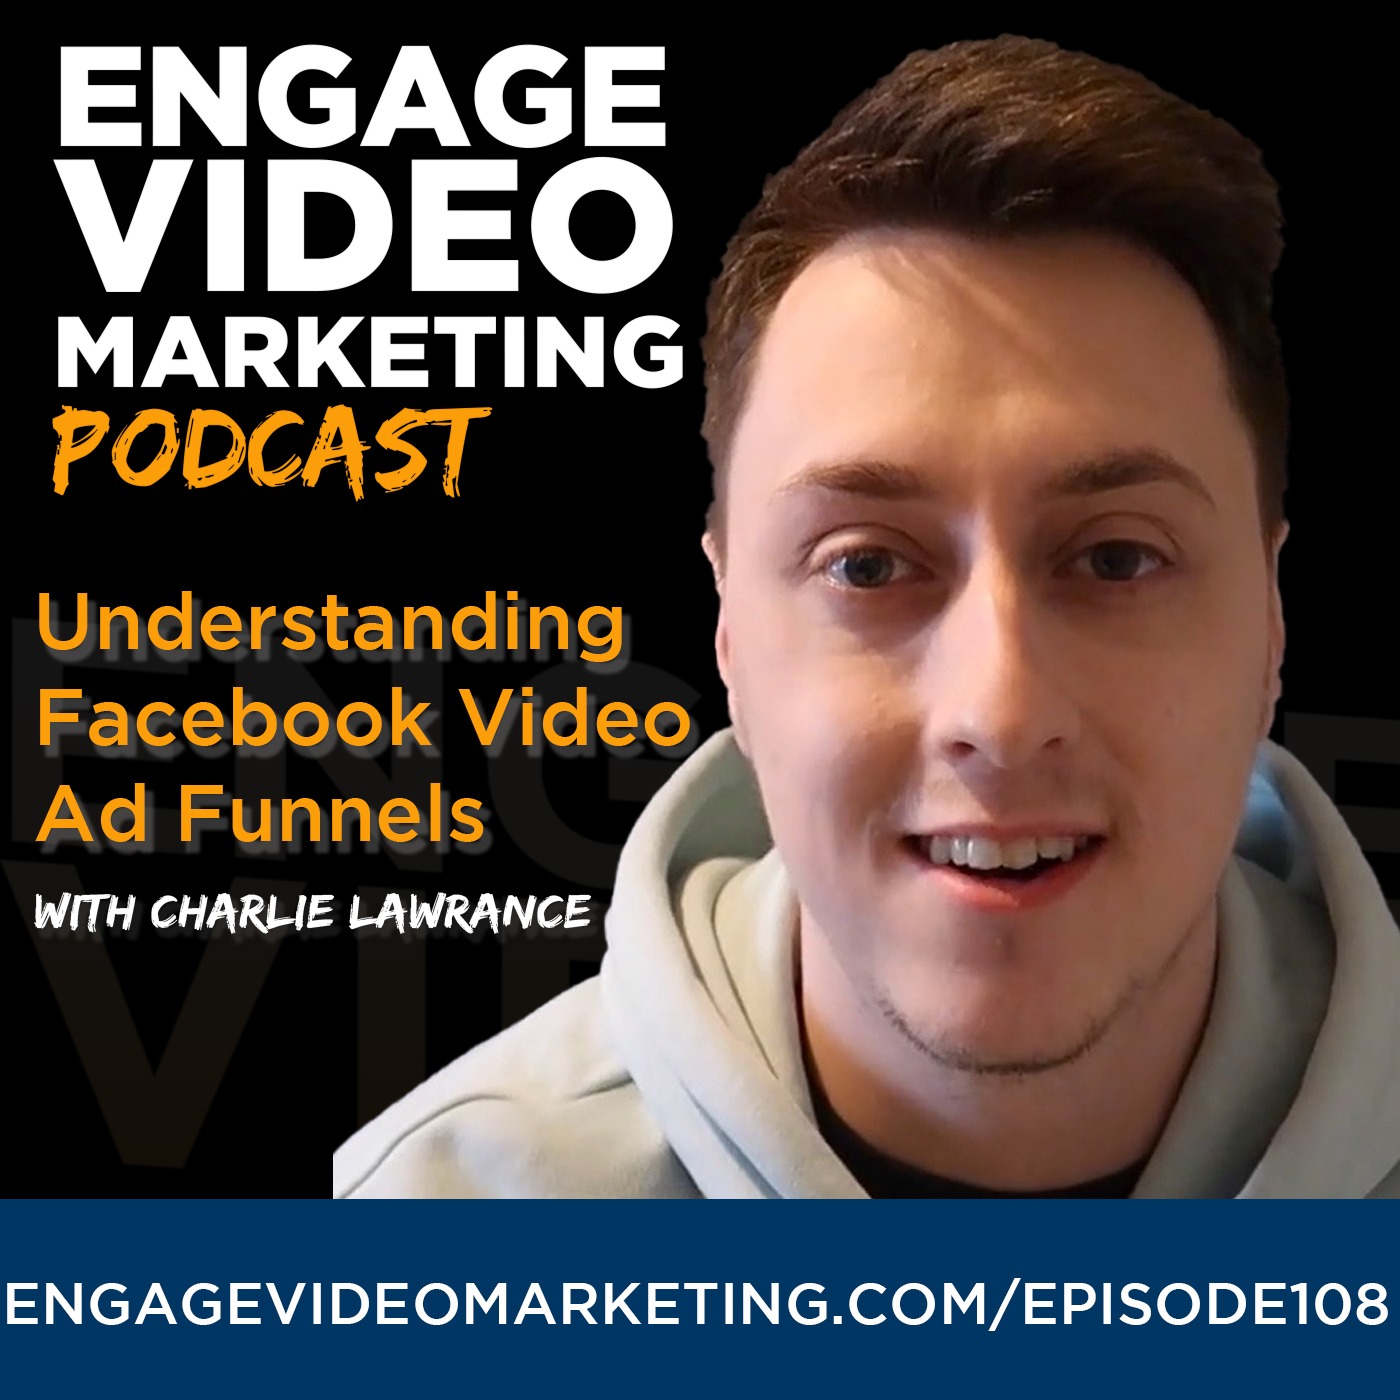 Understanding Facebook Video Ad Funnels with Charlie Lawrance